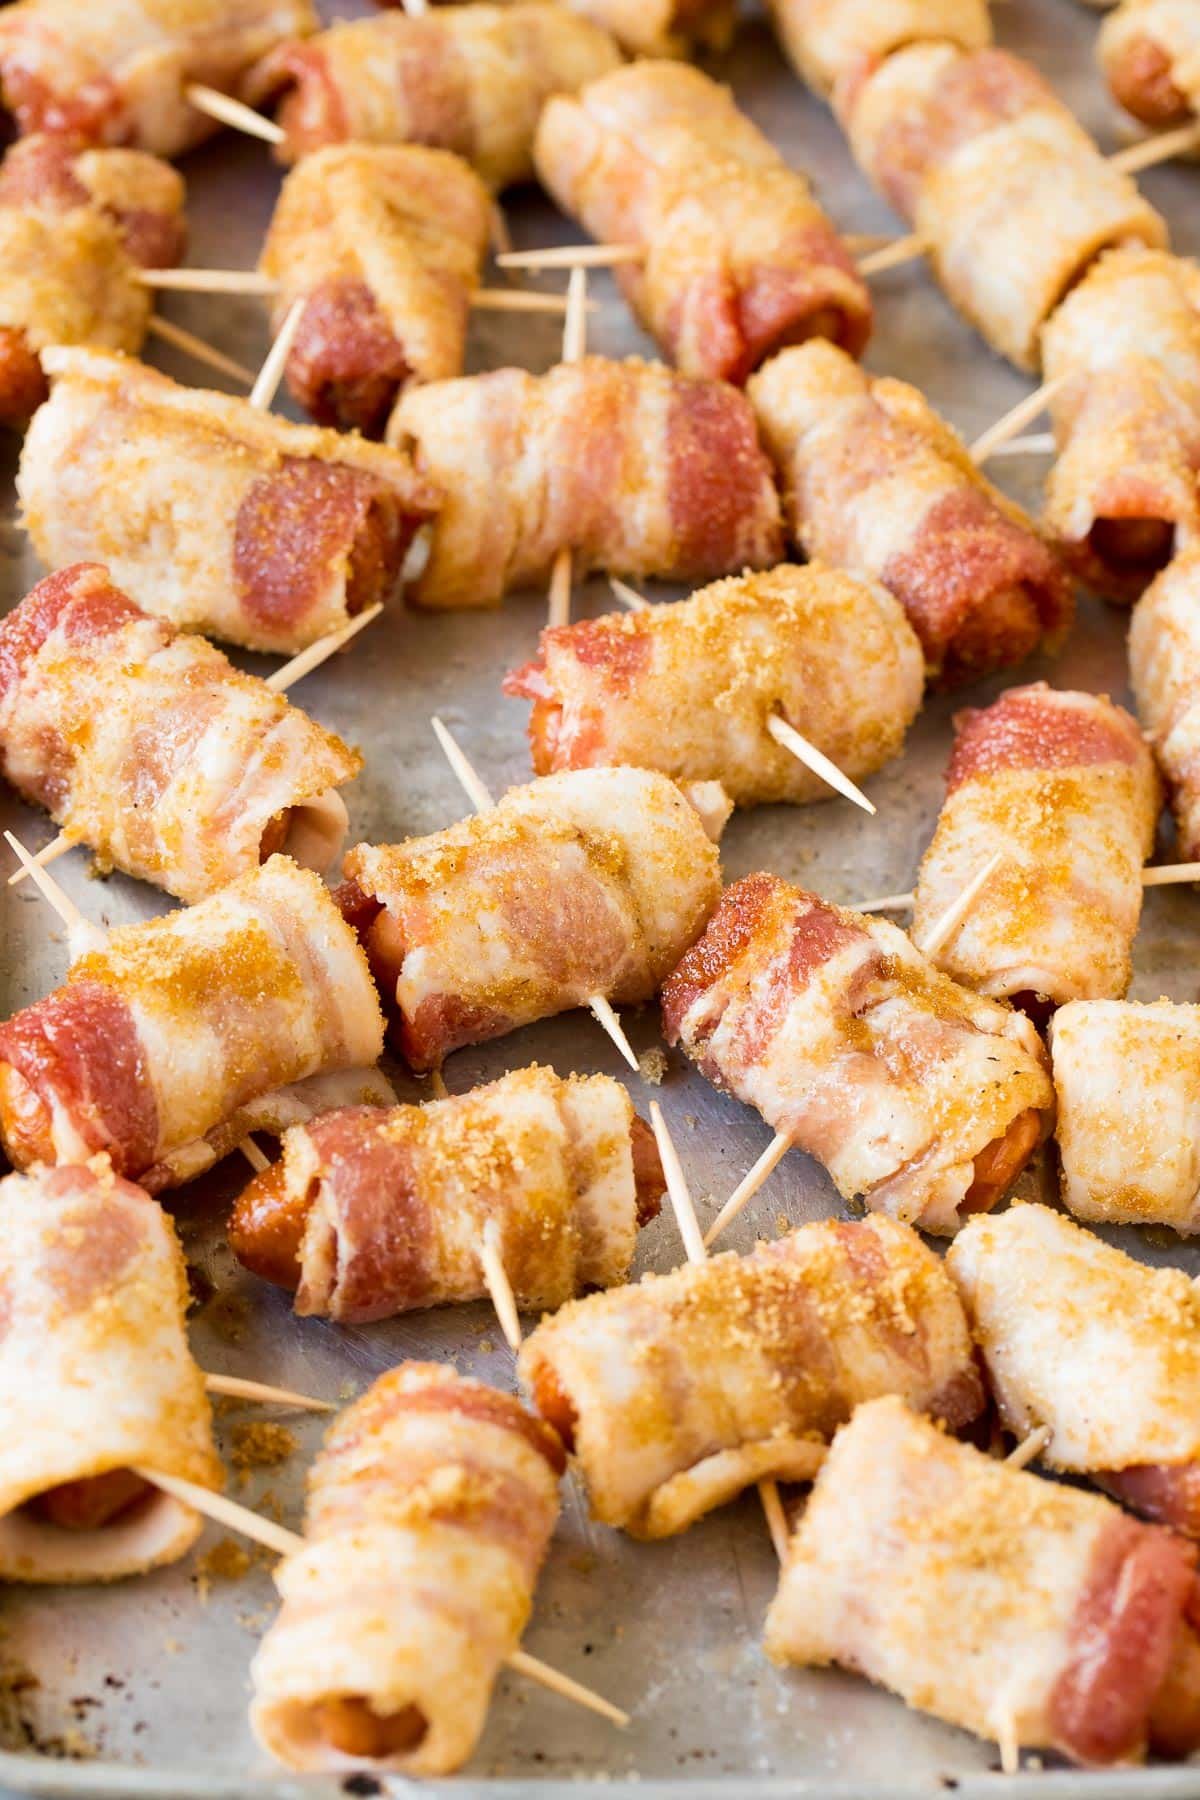 Sausages wrapped in bacon and secured with toothpicks.